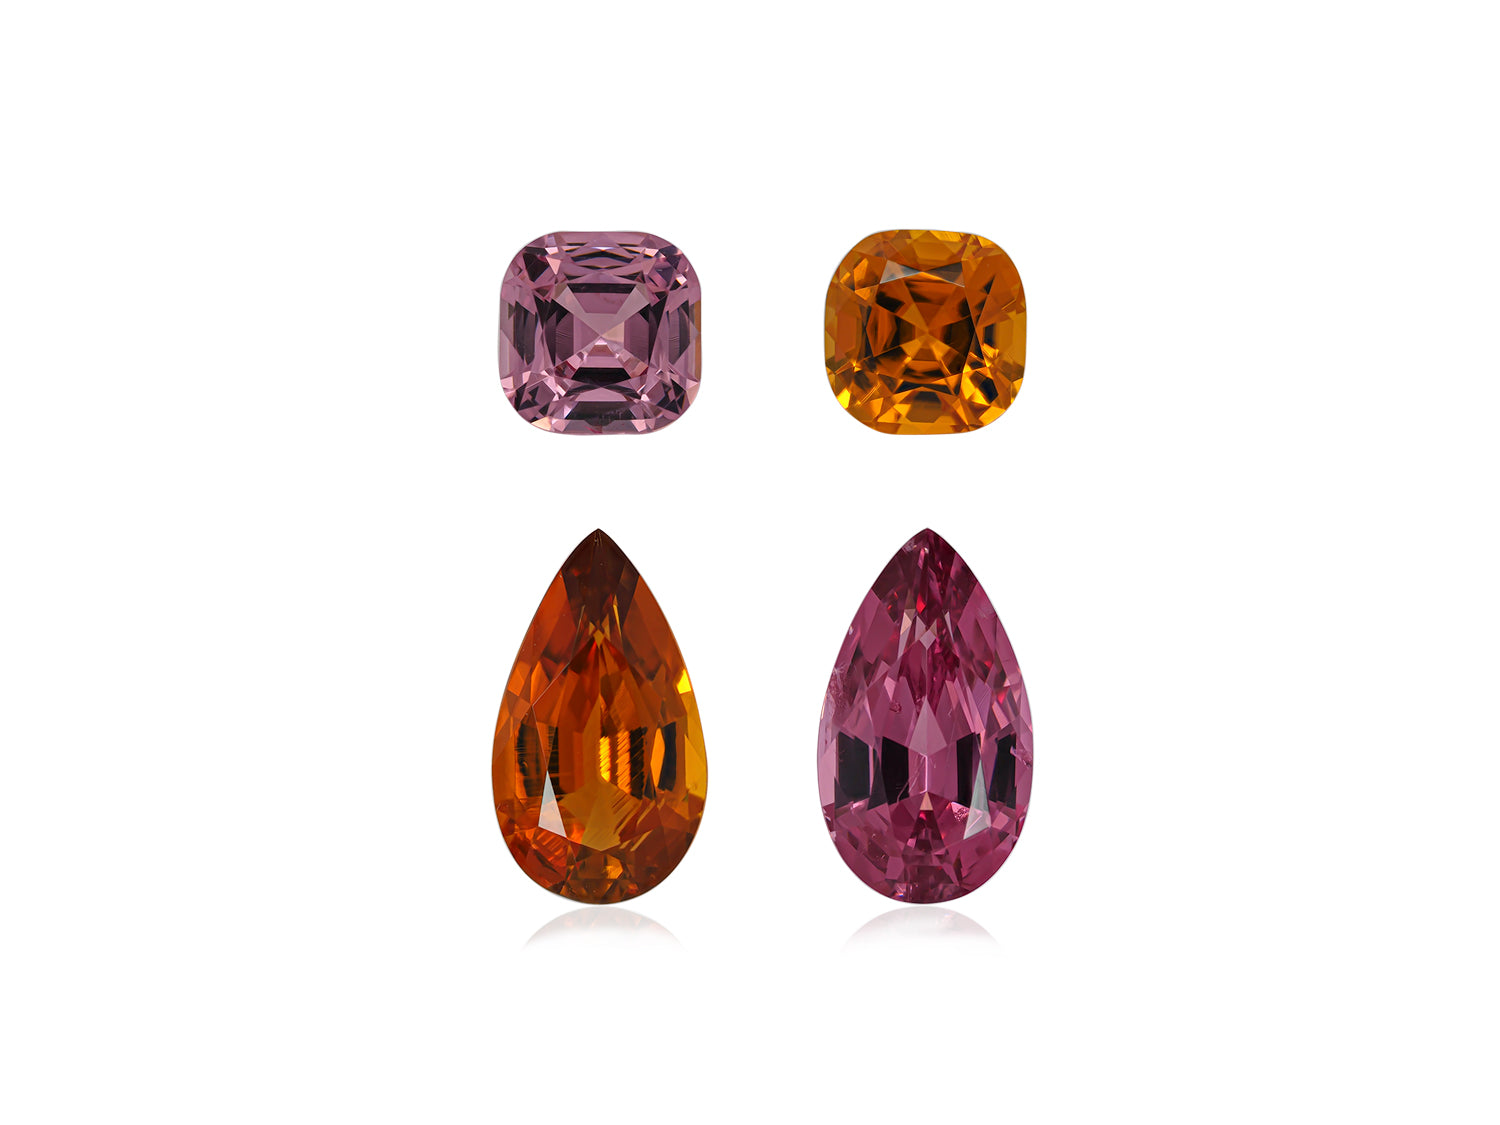 Earring Set Spinel & Clinohumite 6.74 CT / 4